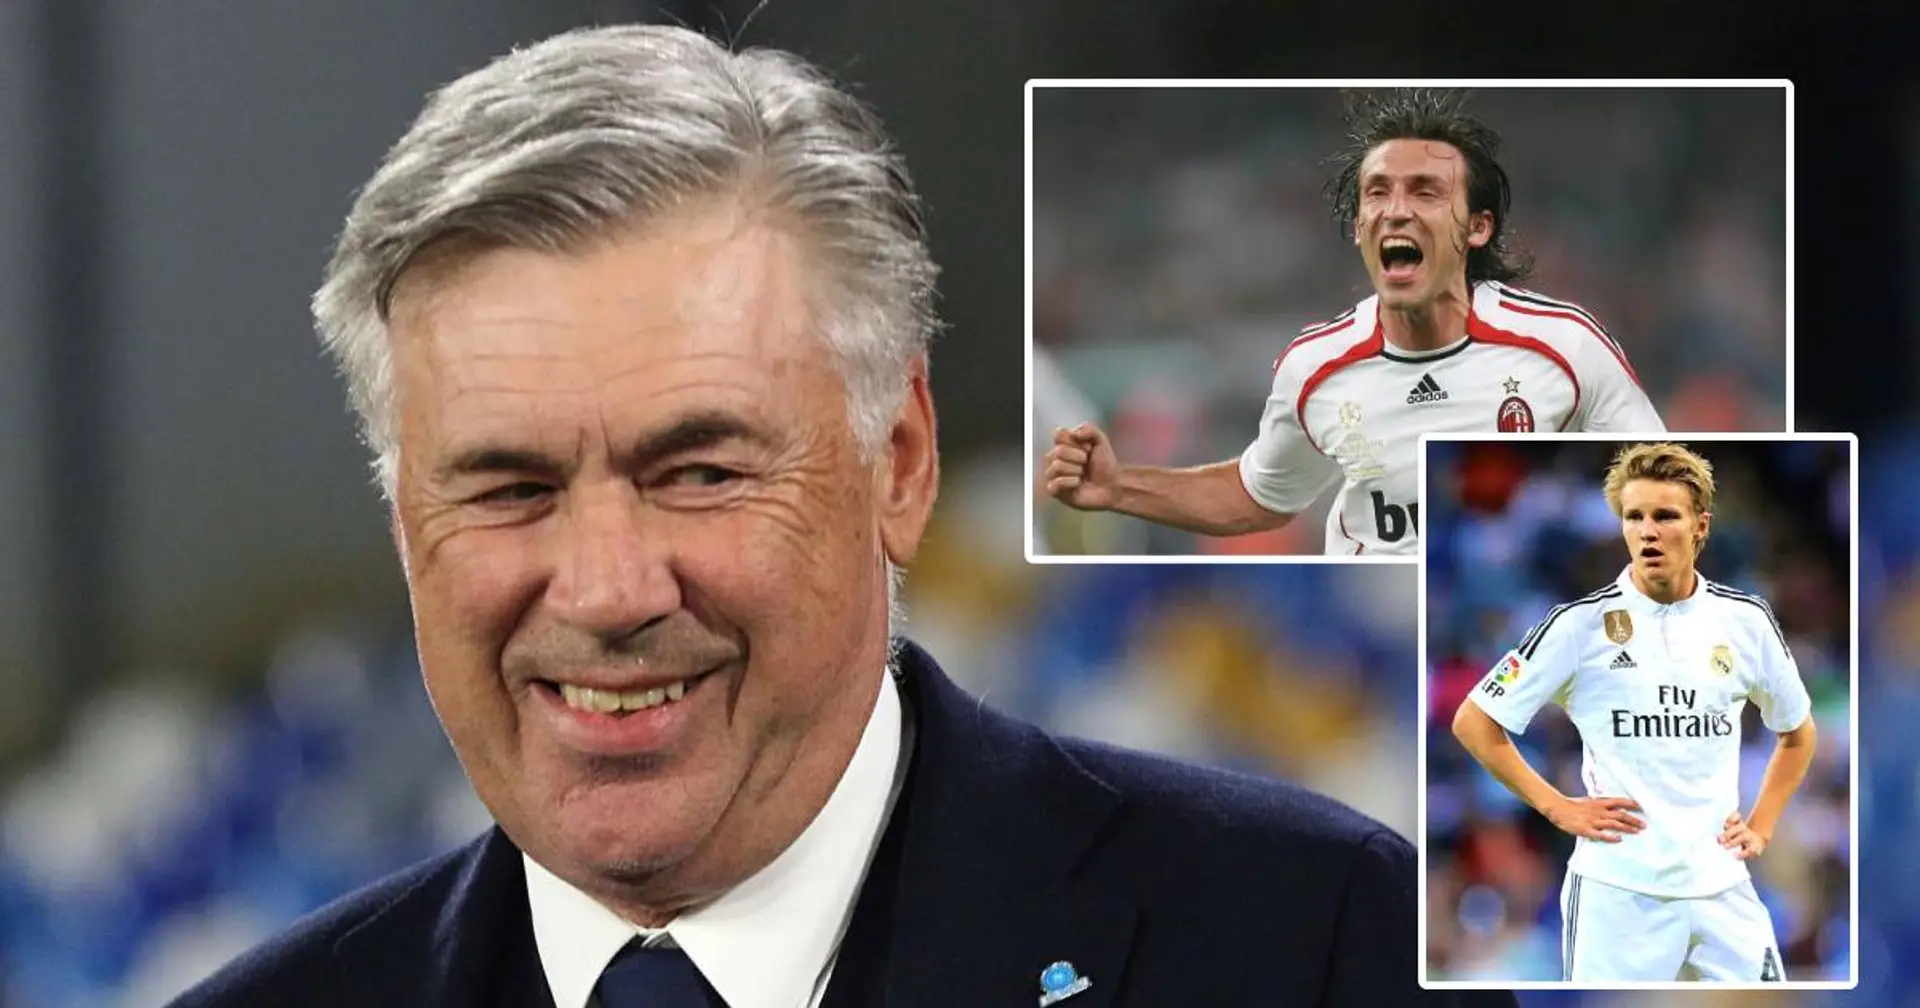 Fan details why Ancelotti would turn Odegaard into world-beater, cites Pirlo, Modric examples